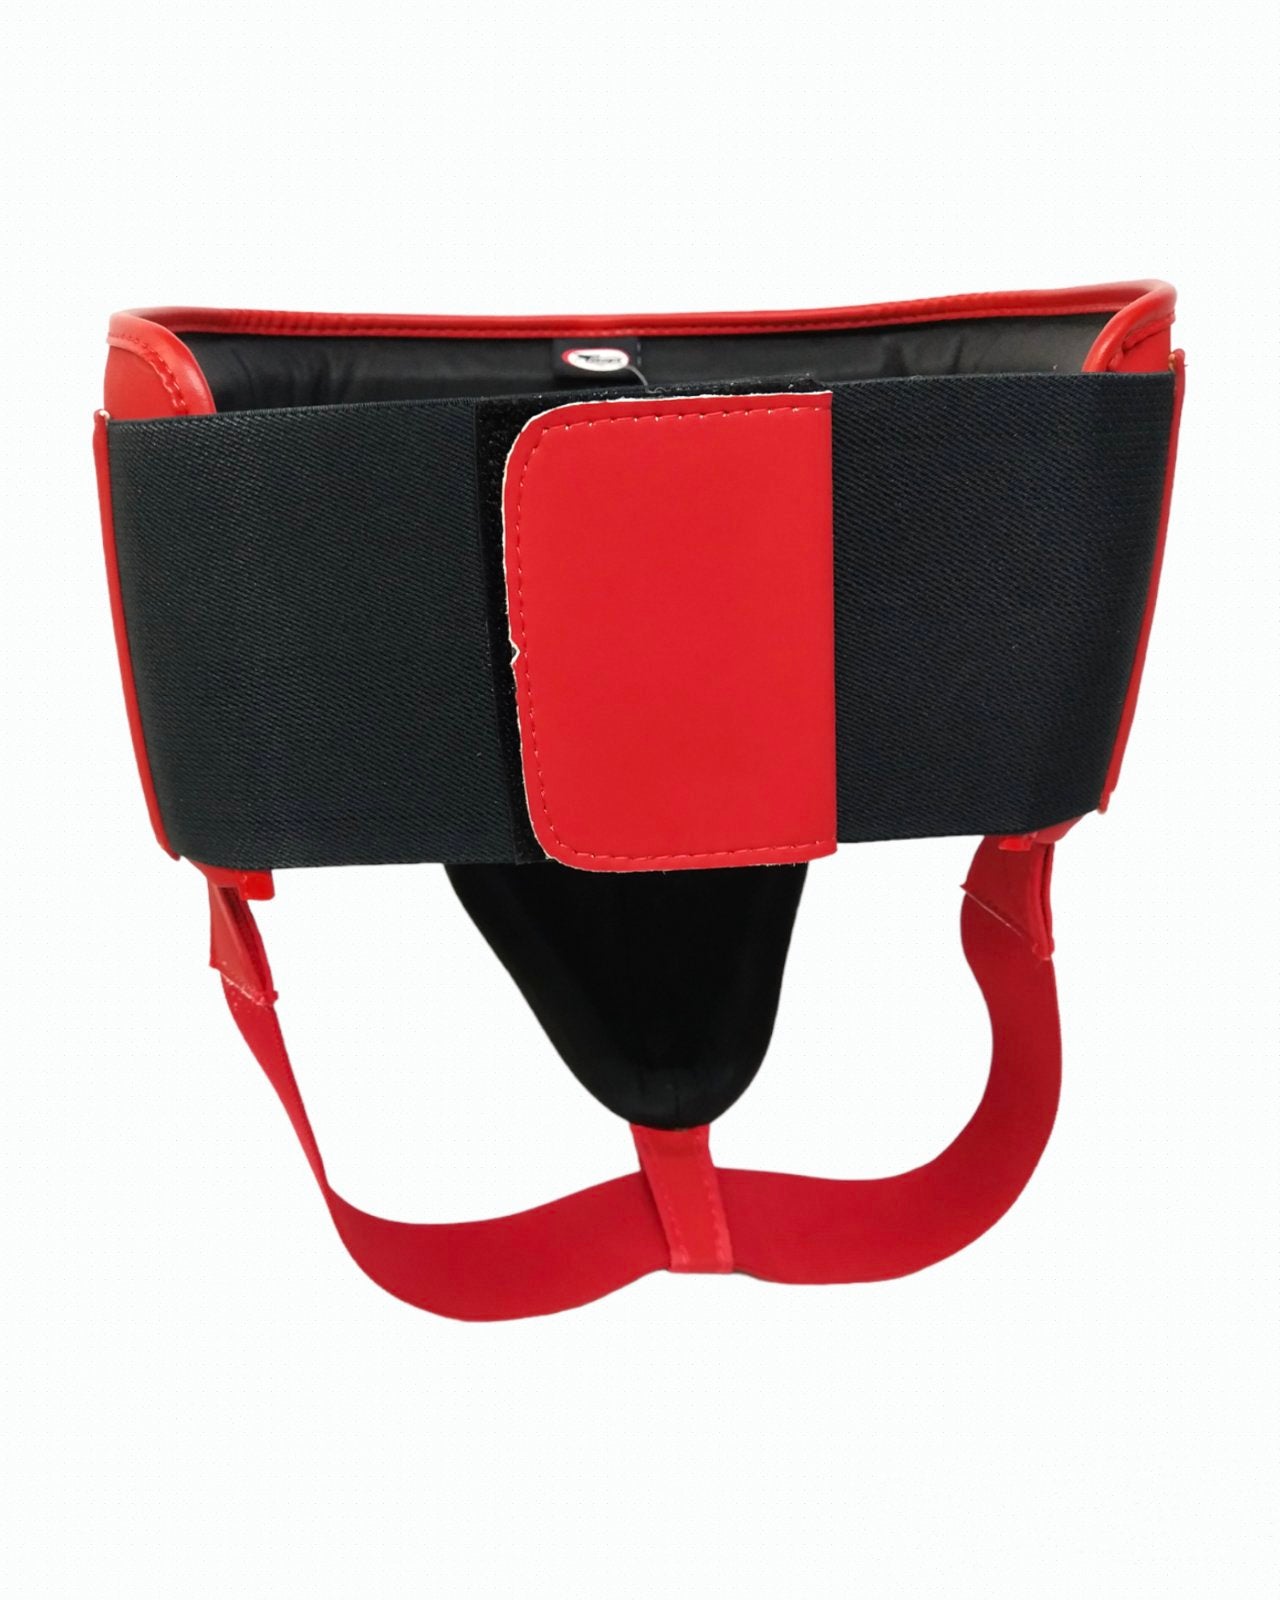 TWINS SPECIAL Abdominal Protector [Red]